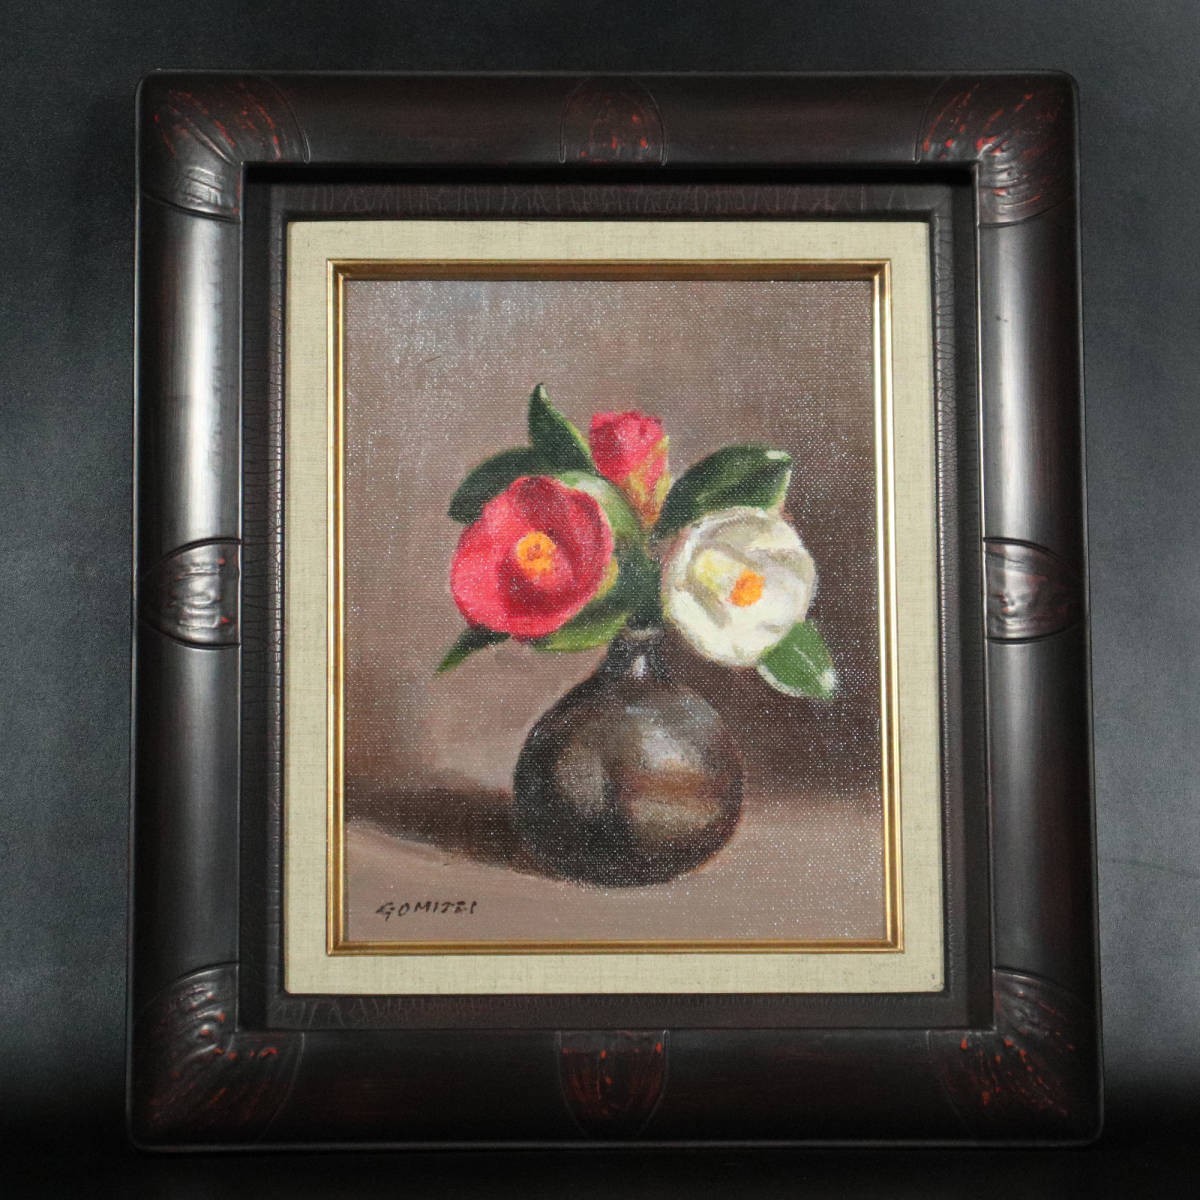 [Authentic] ■ Teishiro Gomi ■ Red and White Camellia Bizen Jar Oil painting/Authentic guaranteed 230807007, Painting, Oil painting, Still life